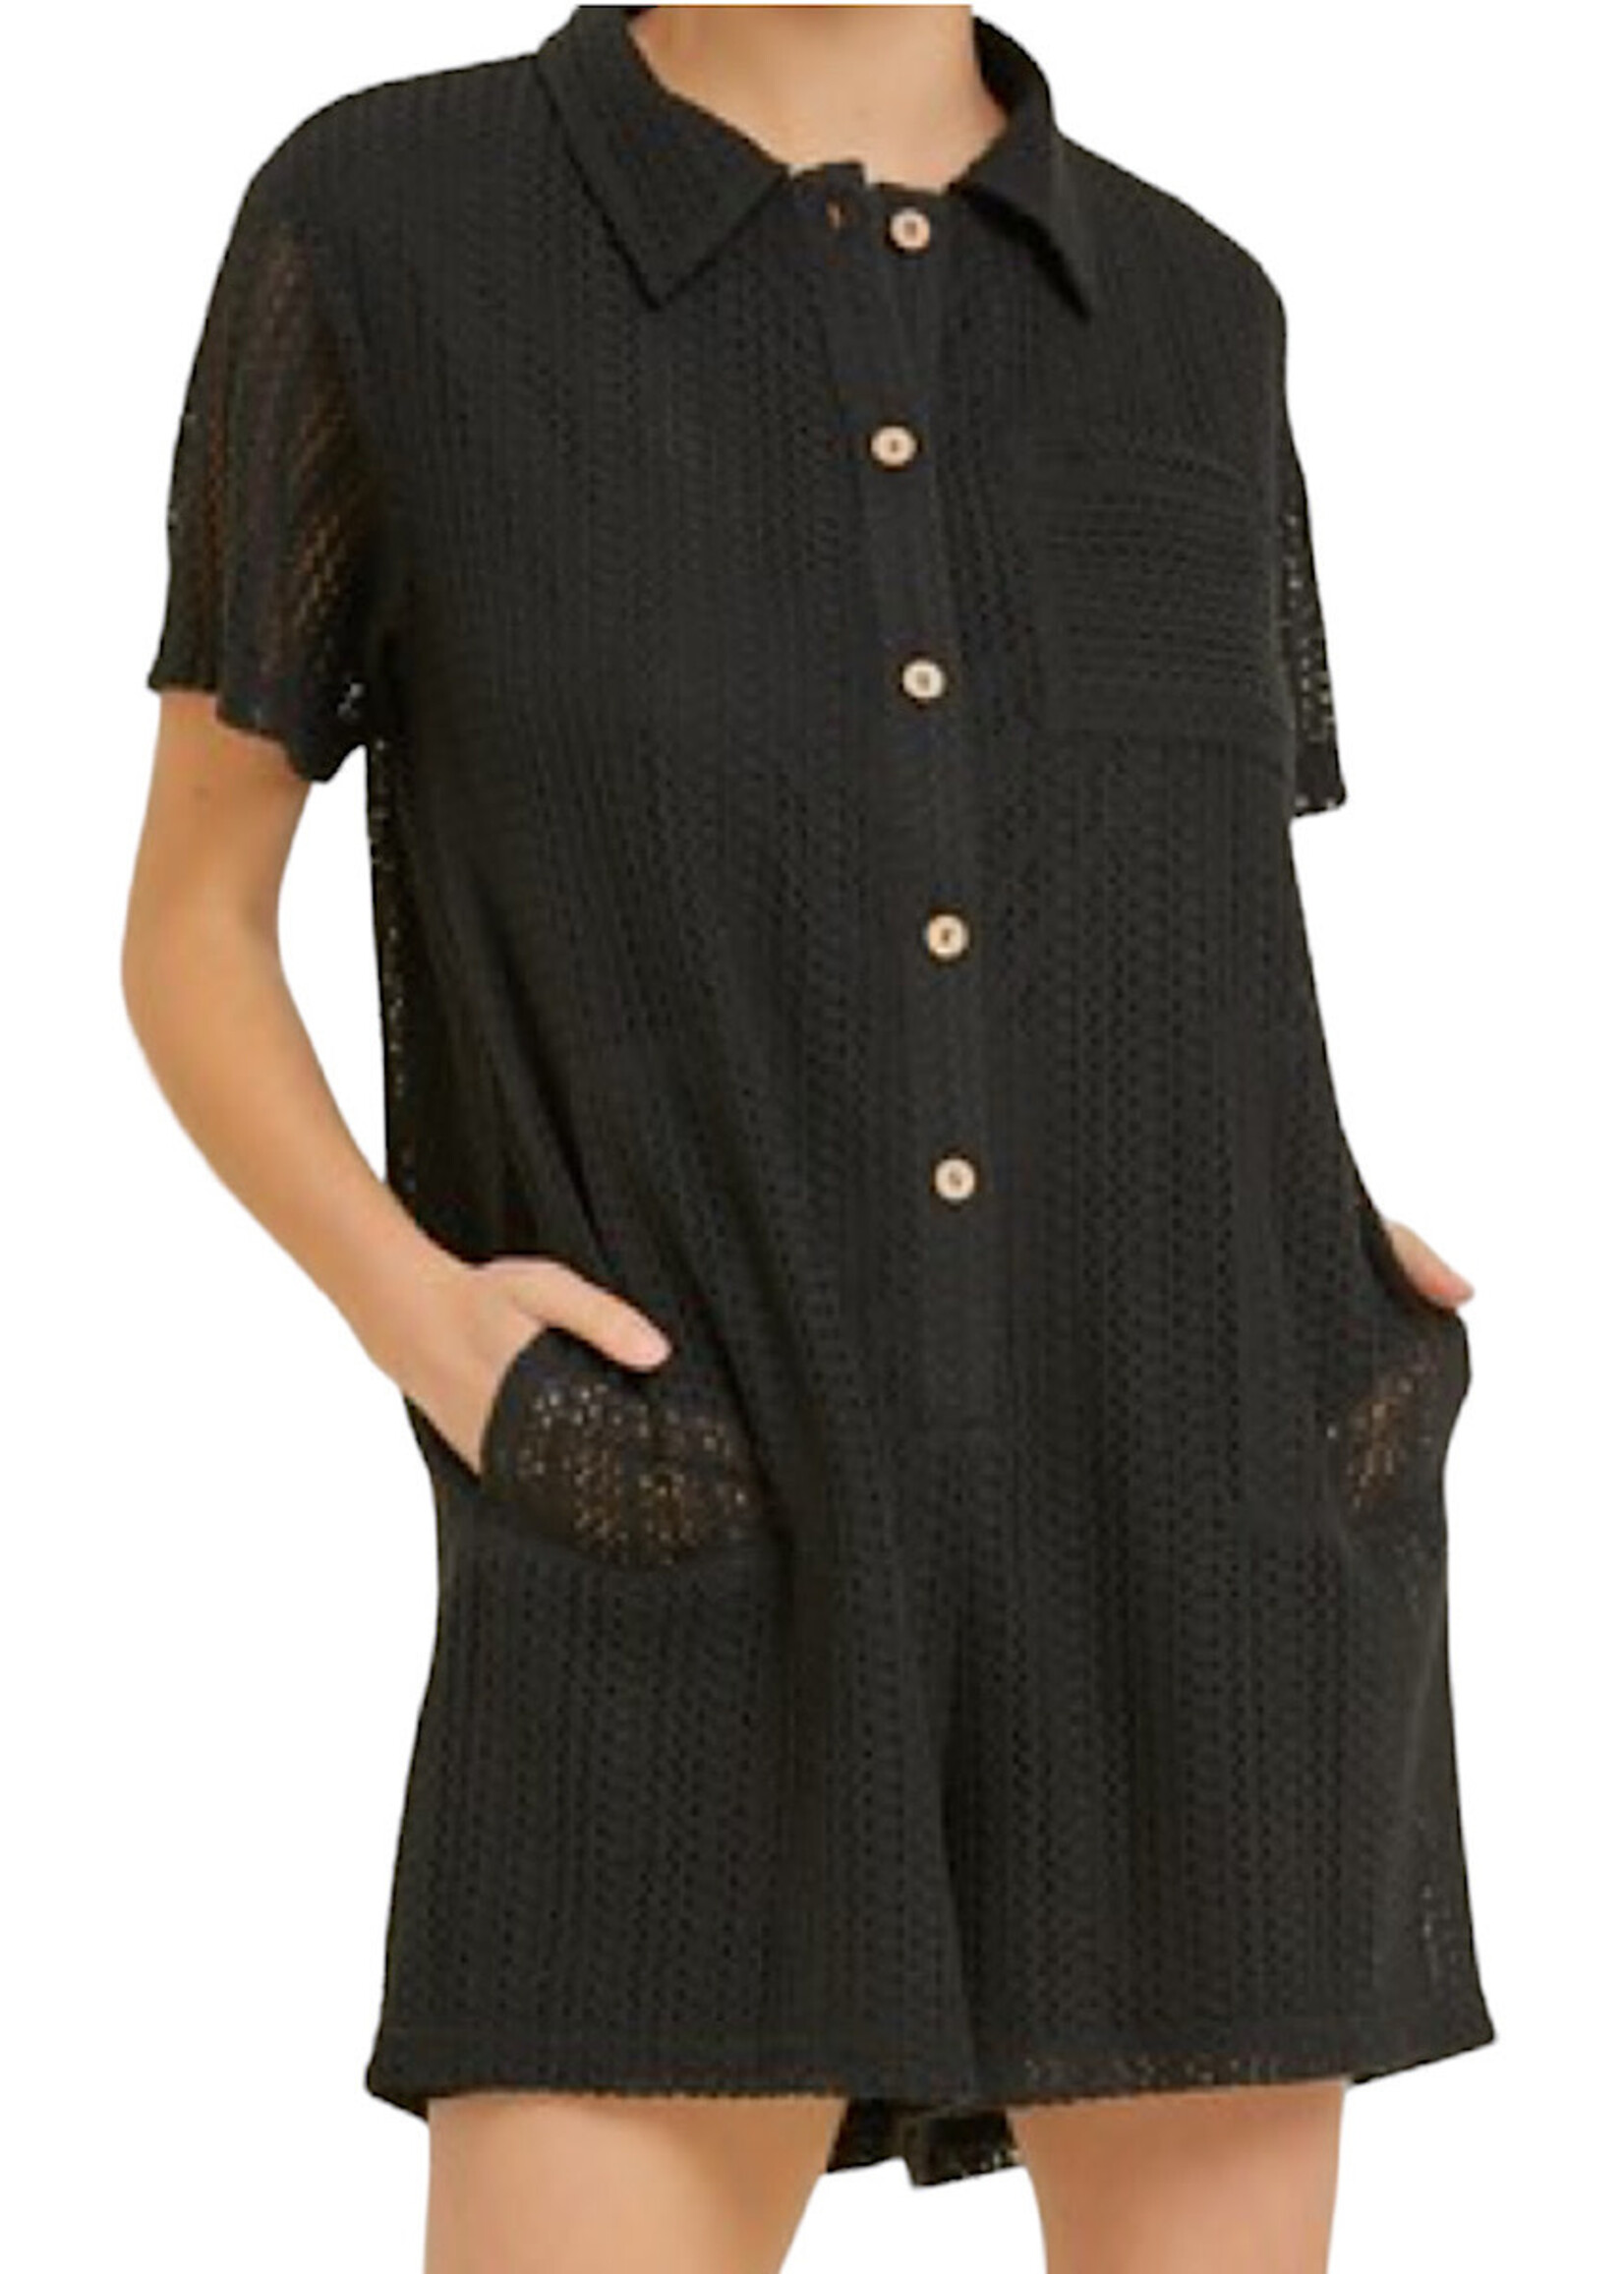 Black Button Down Crochet Romper with Pockets